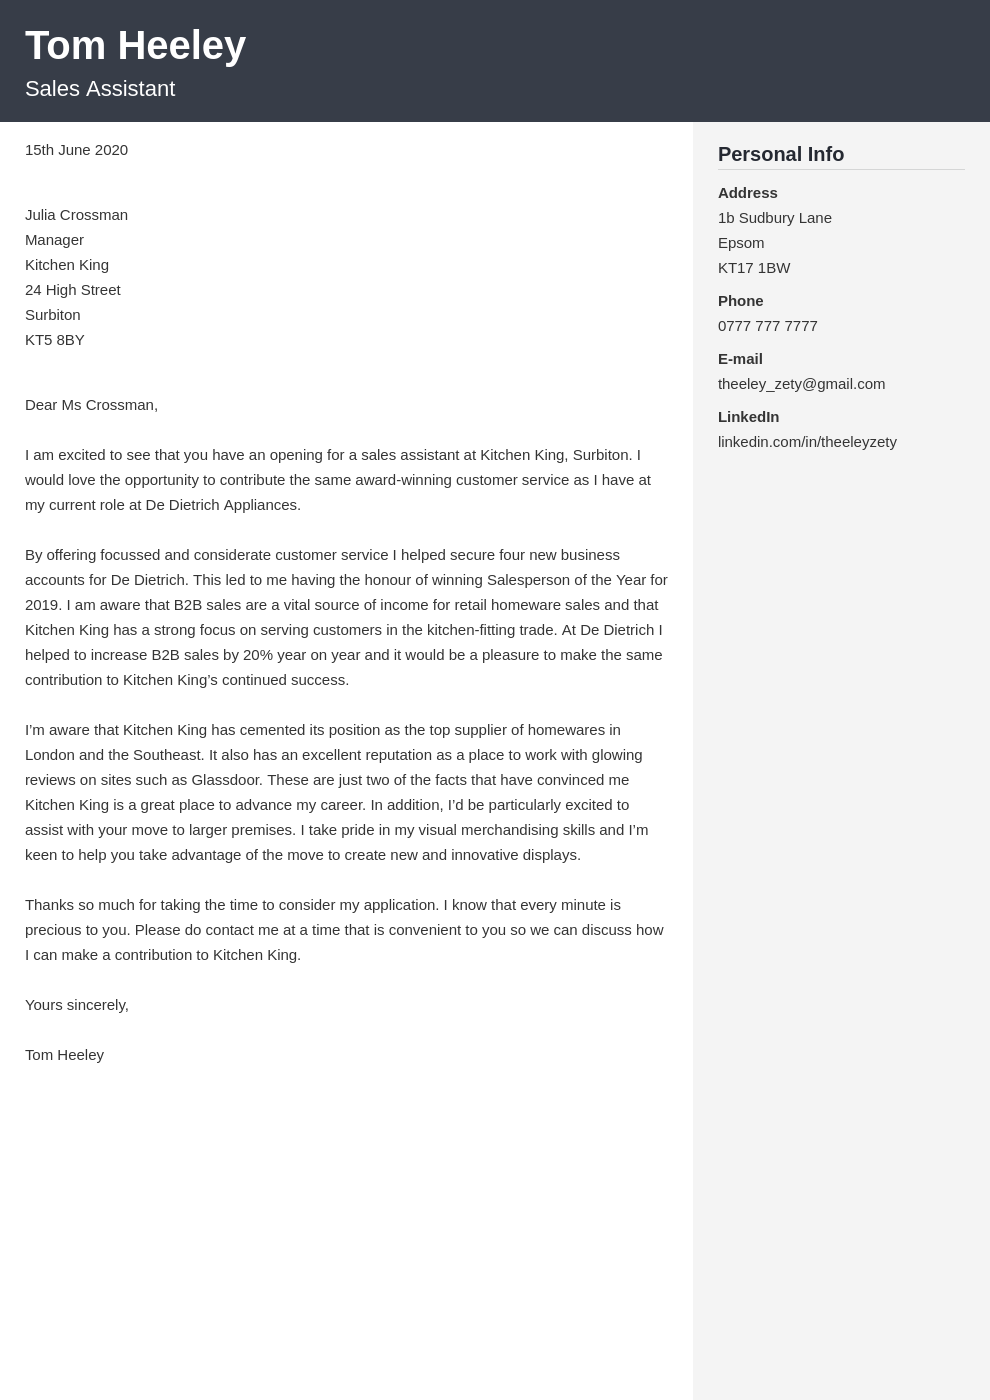 example of an application letter as a sales assistant